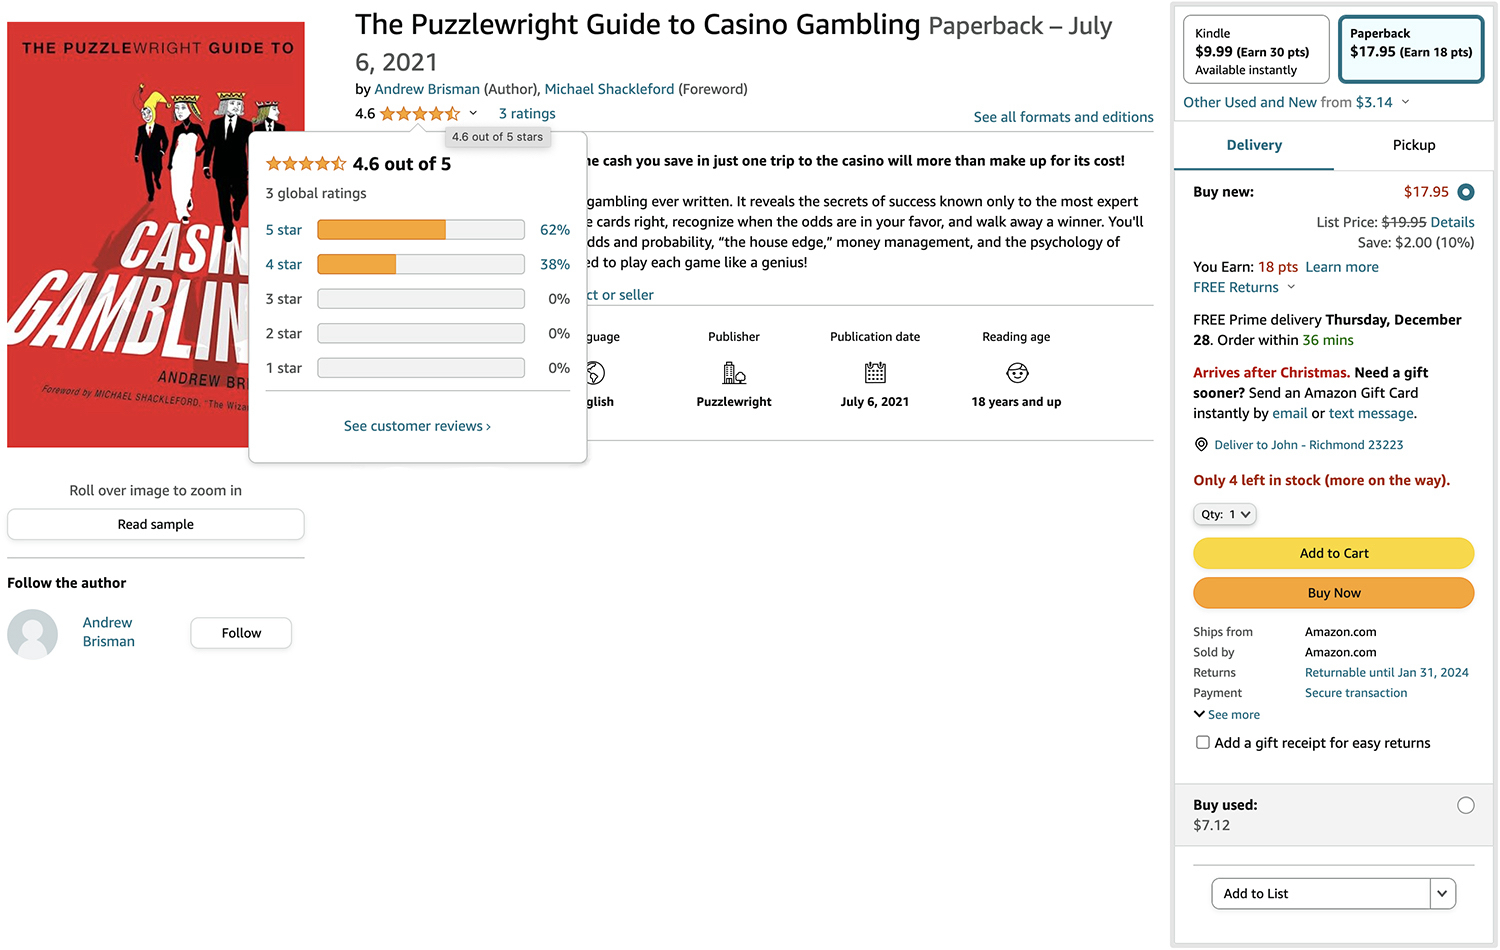 The Puzzlewright Guide to Casino Gambling